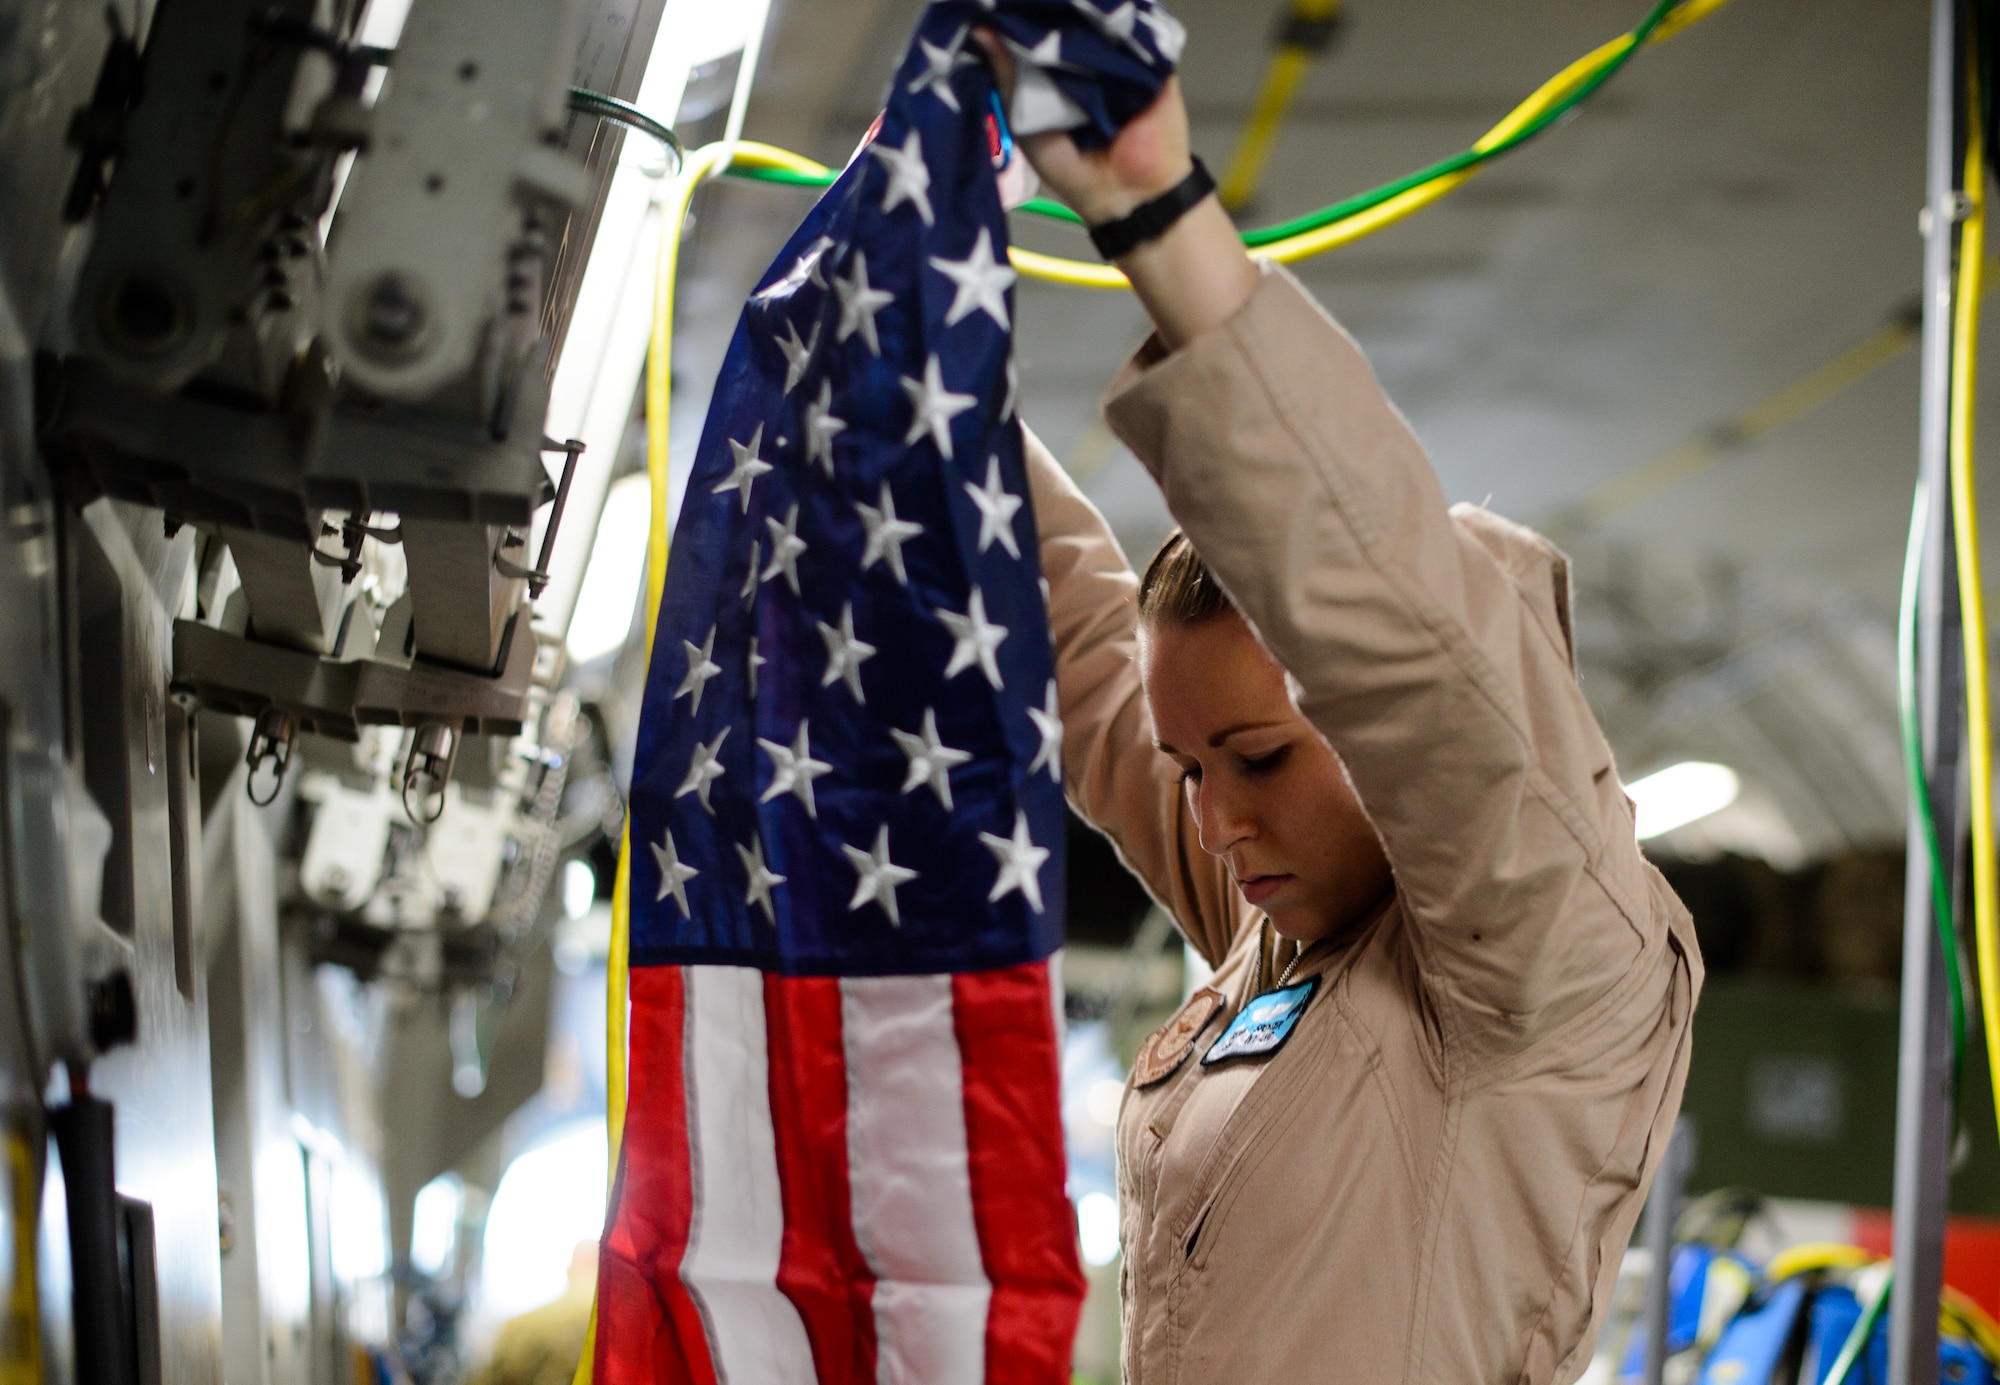 Senior Airman Beverly Spencer, 10th Expeditionary Aeromedical Evacuation Flight technician, hangs a flag inside a C-17 Globemaster III Nov. 10, 2015, at Ramstein Air Base, Germany. Spencer and crews from the 10th EAEF are deployed to Ramstein as a bridge between the deployed environment and medical facilities in the U.S. and Germany. Many Air Force aircraft conduct aeromedical evacuation, bringing the injured to the help they need. (U.S. Air Force photo/Staff Sgt. Armando A. Schwier-Morales)